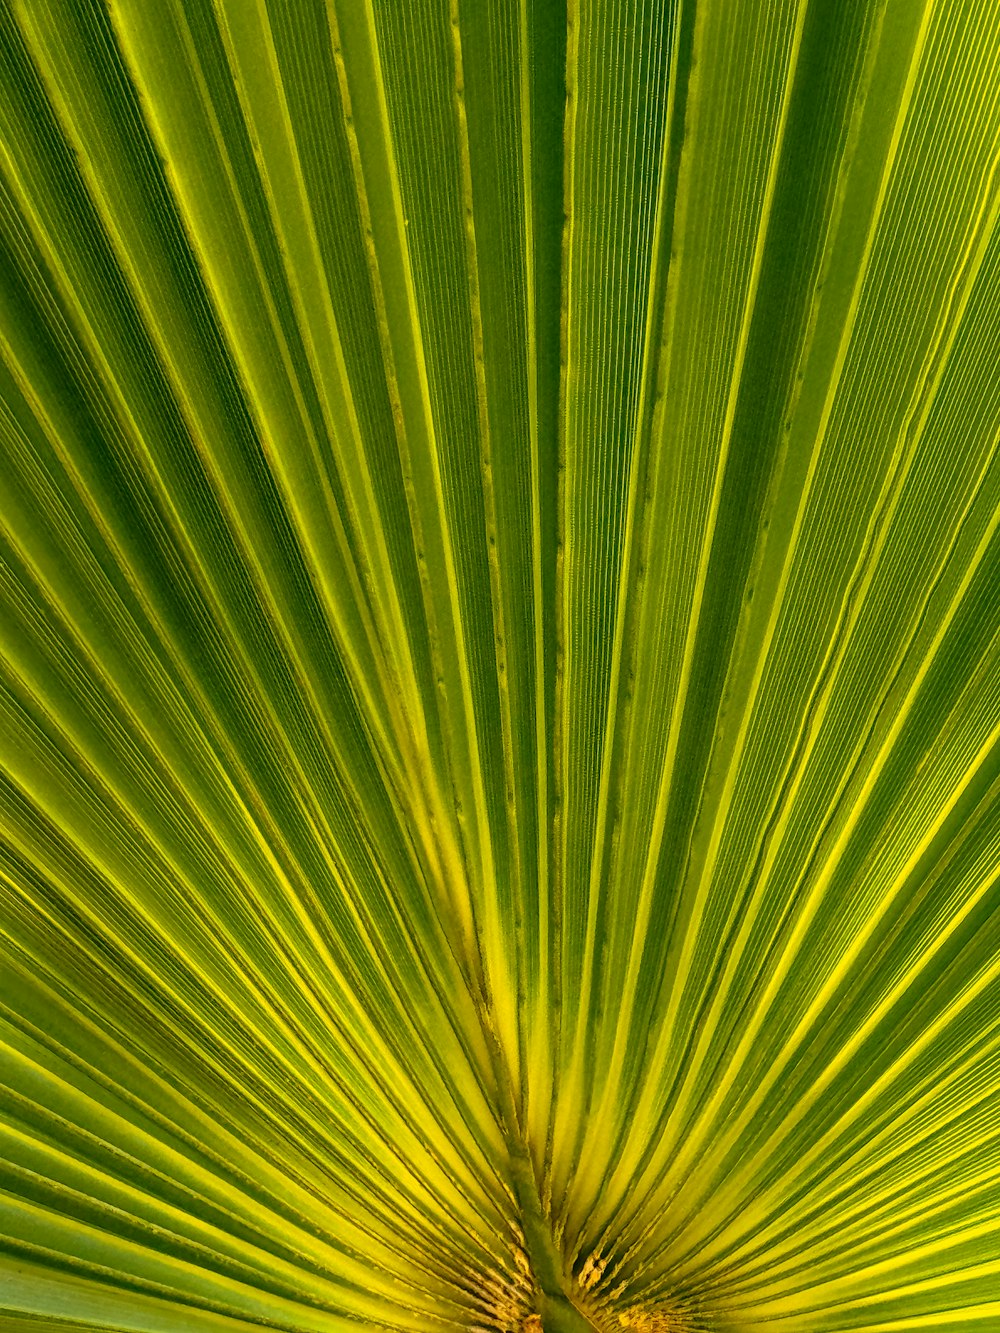 a close up view of a large green leaf